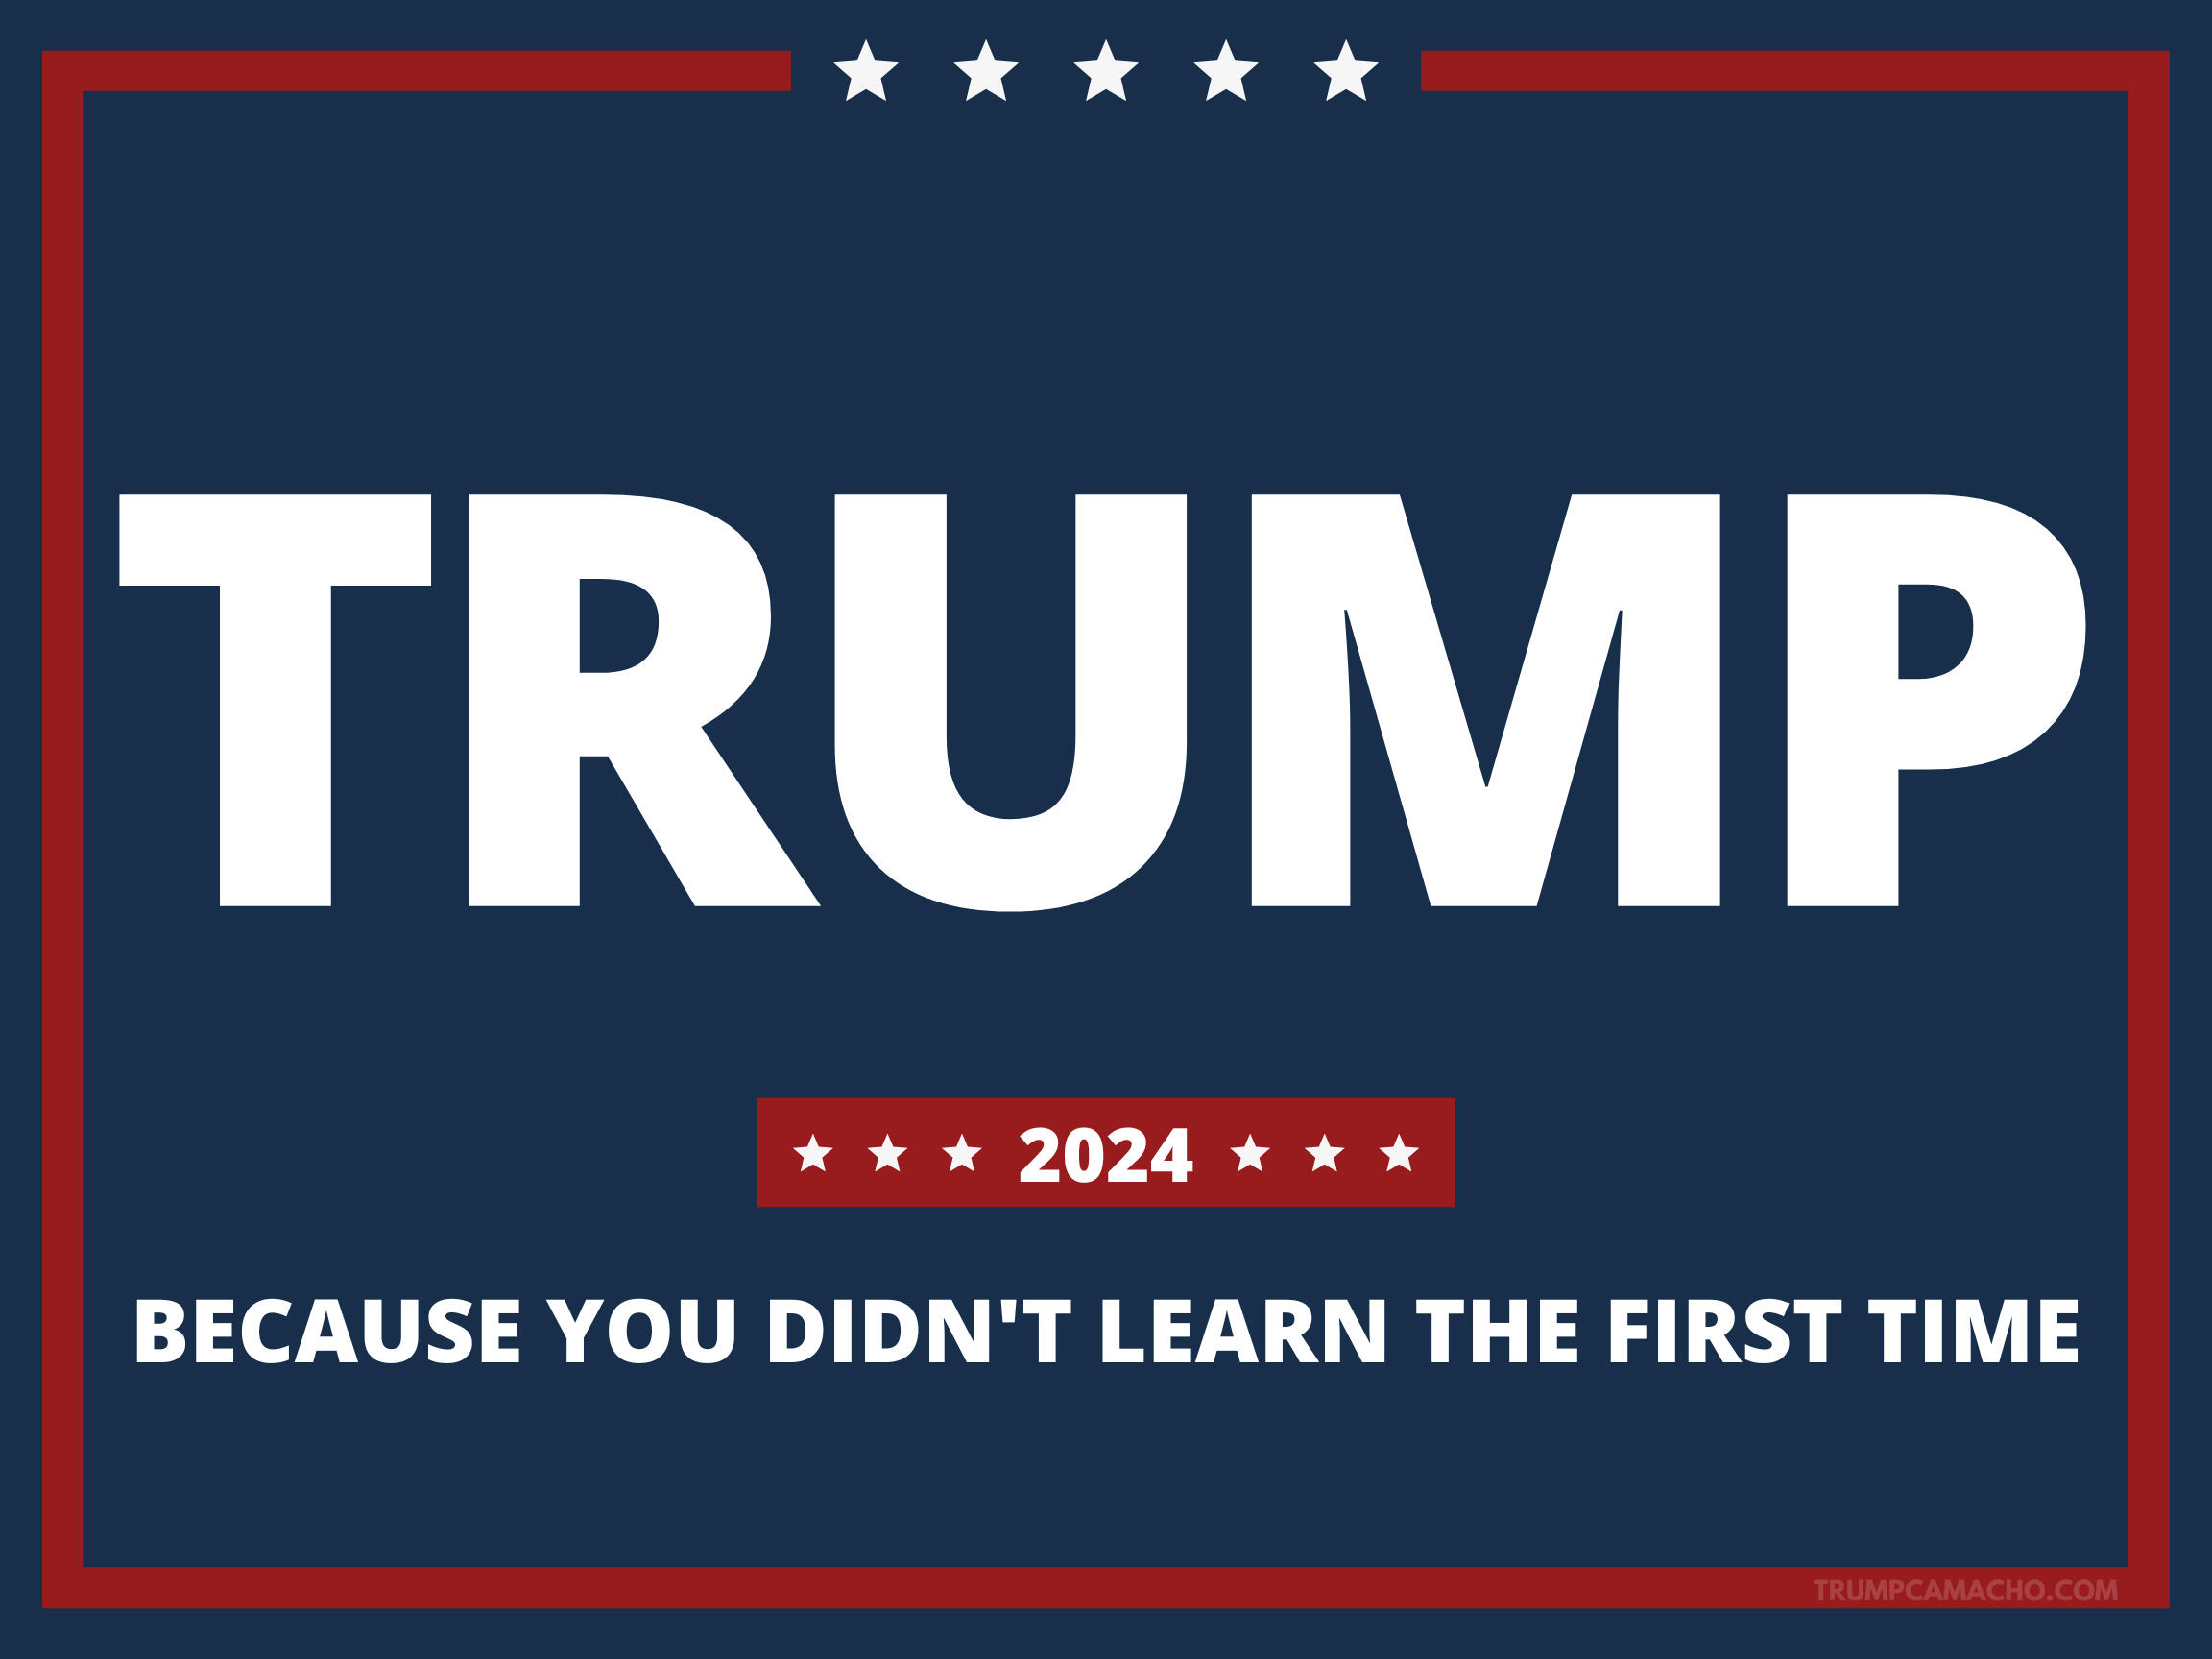 Trump 2024 Campaign Poster: Because You Didn't Learn The First Time Poster